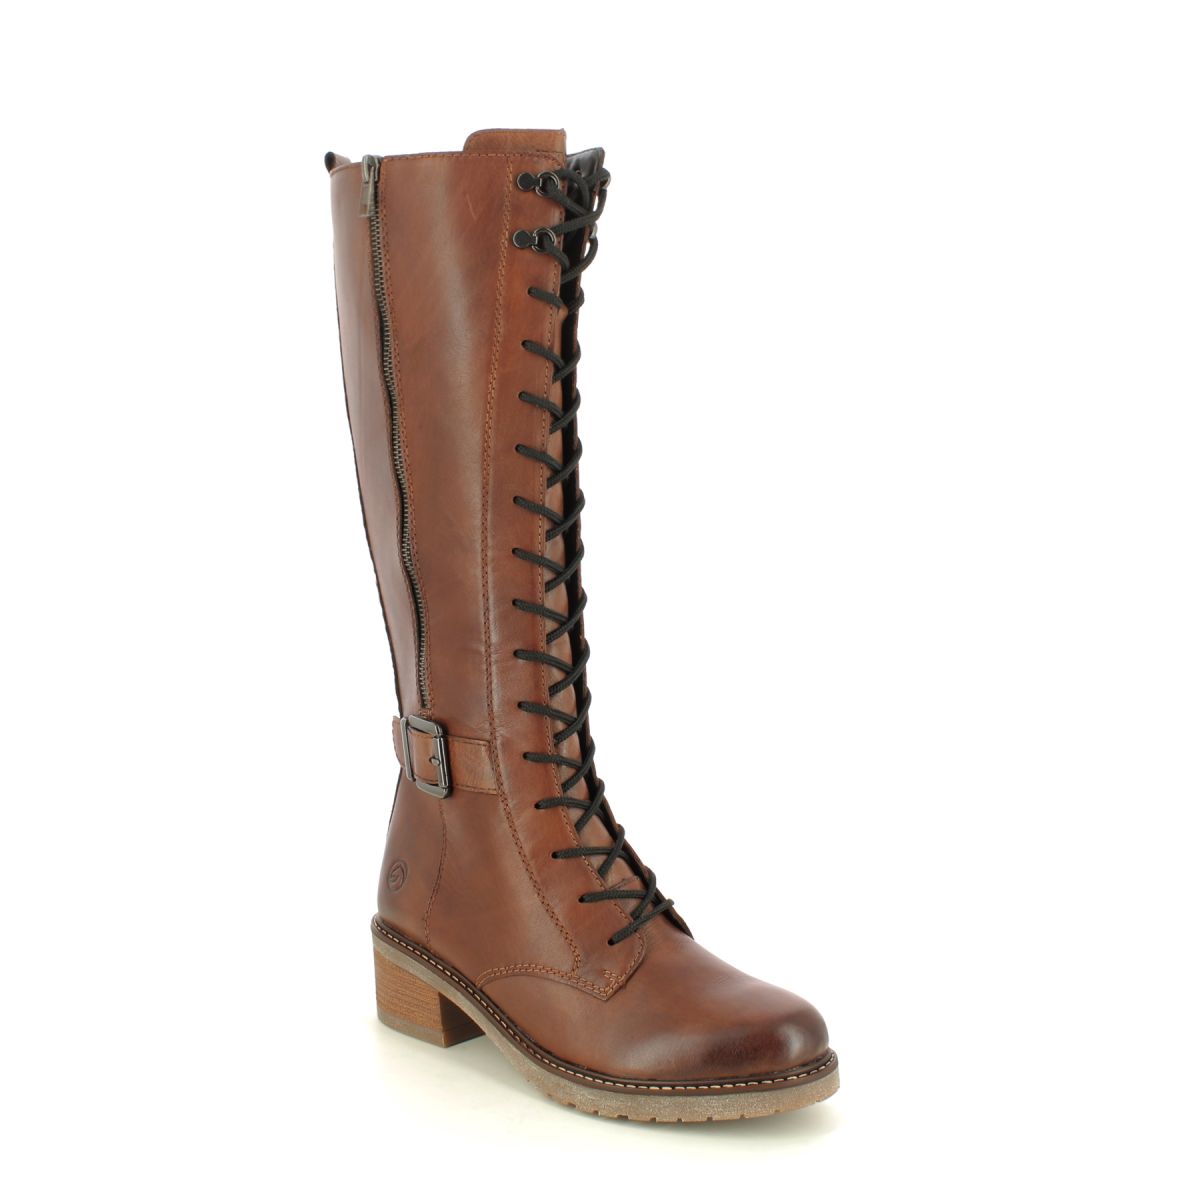 Remonte Menarem Lace Brown Leather Womens Knee-High Boots D1A74-22 In Size 38 In Plain Brown Leather